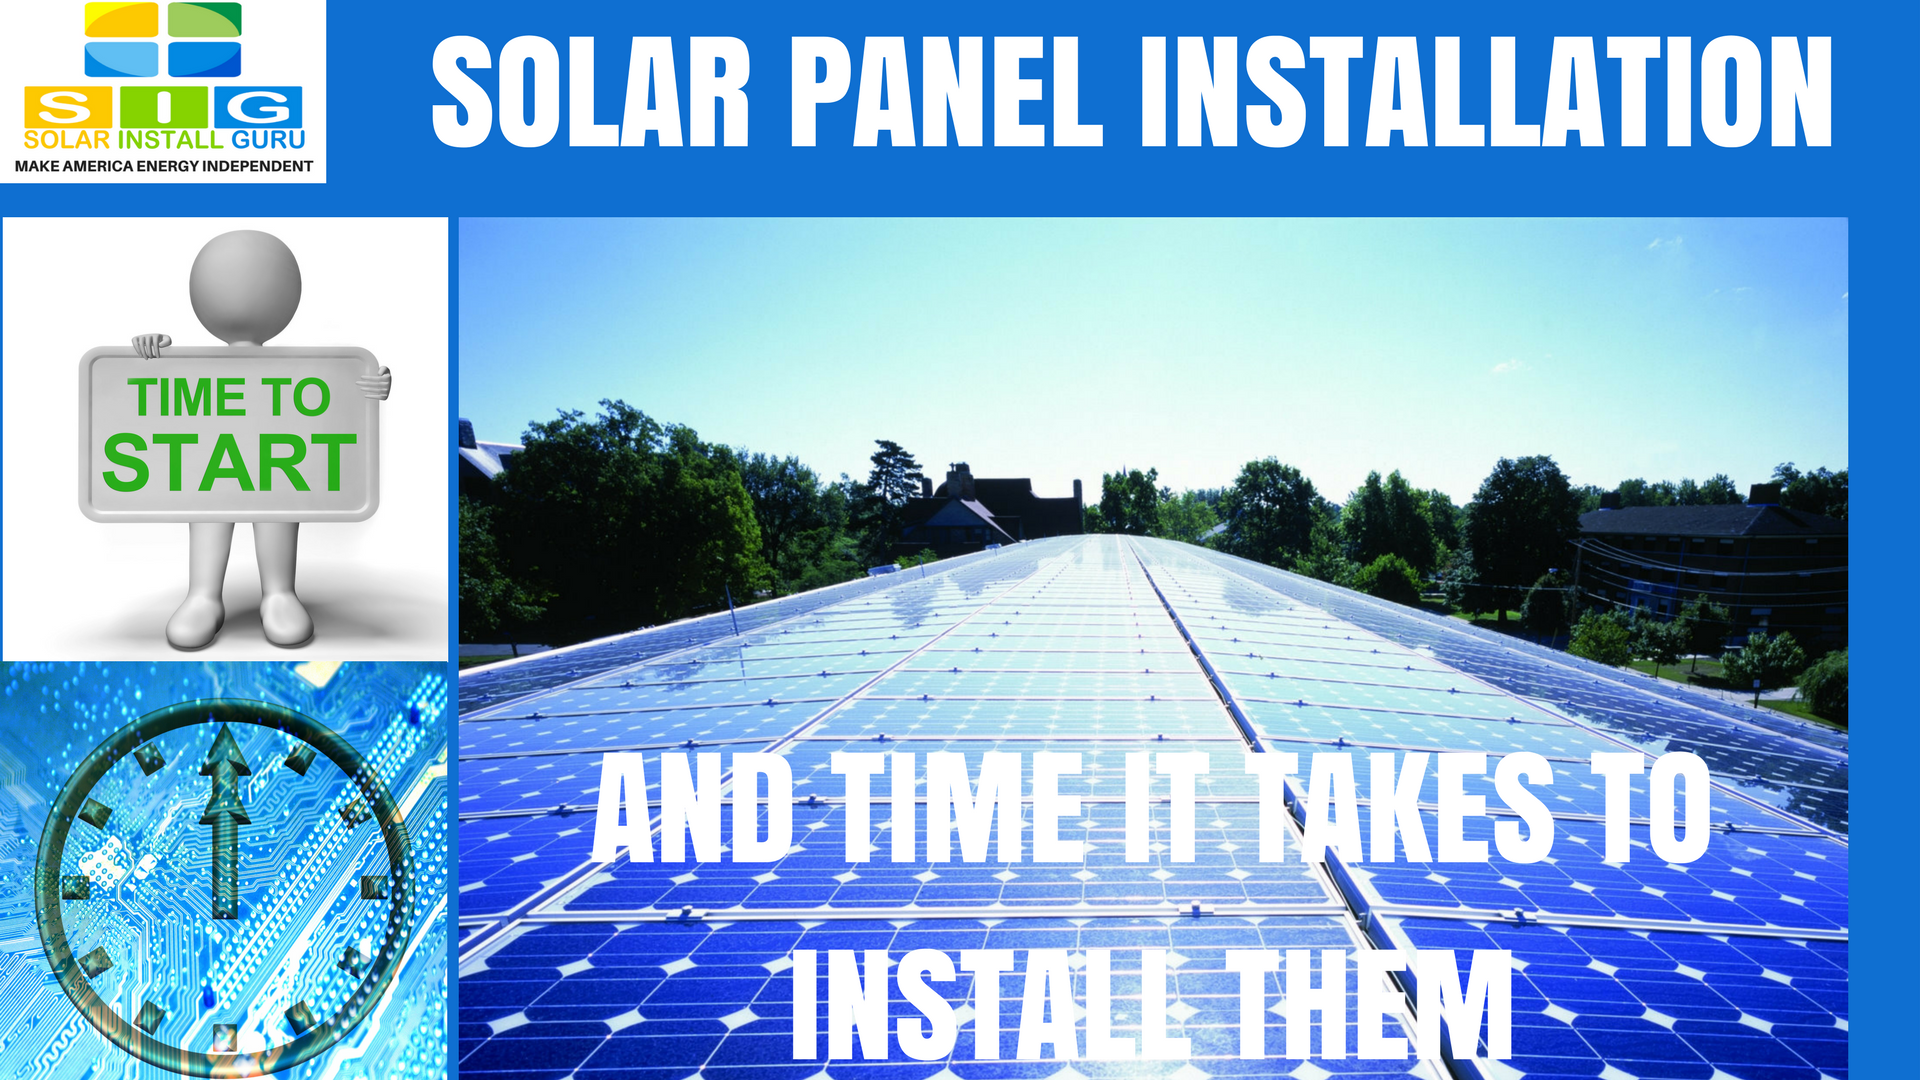 How long does it take to install solar panels